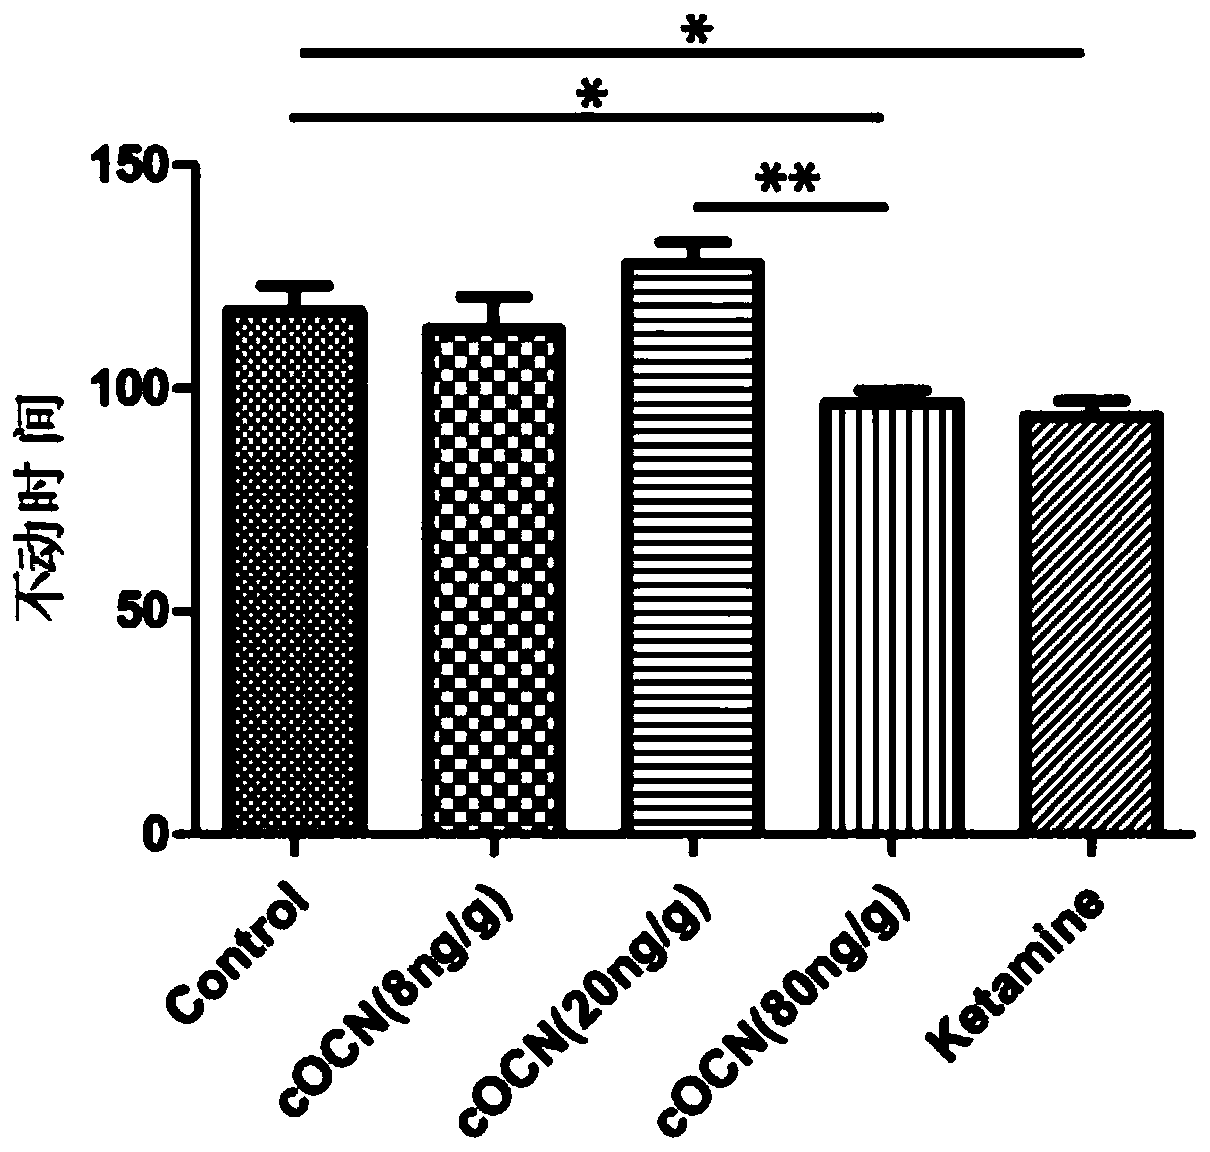 Application of fully carboxylated osteocalcin in the preparation of rapid antidepressants